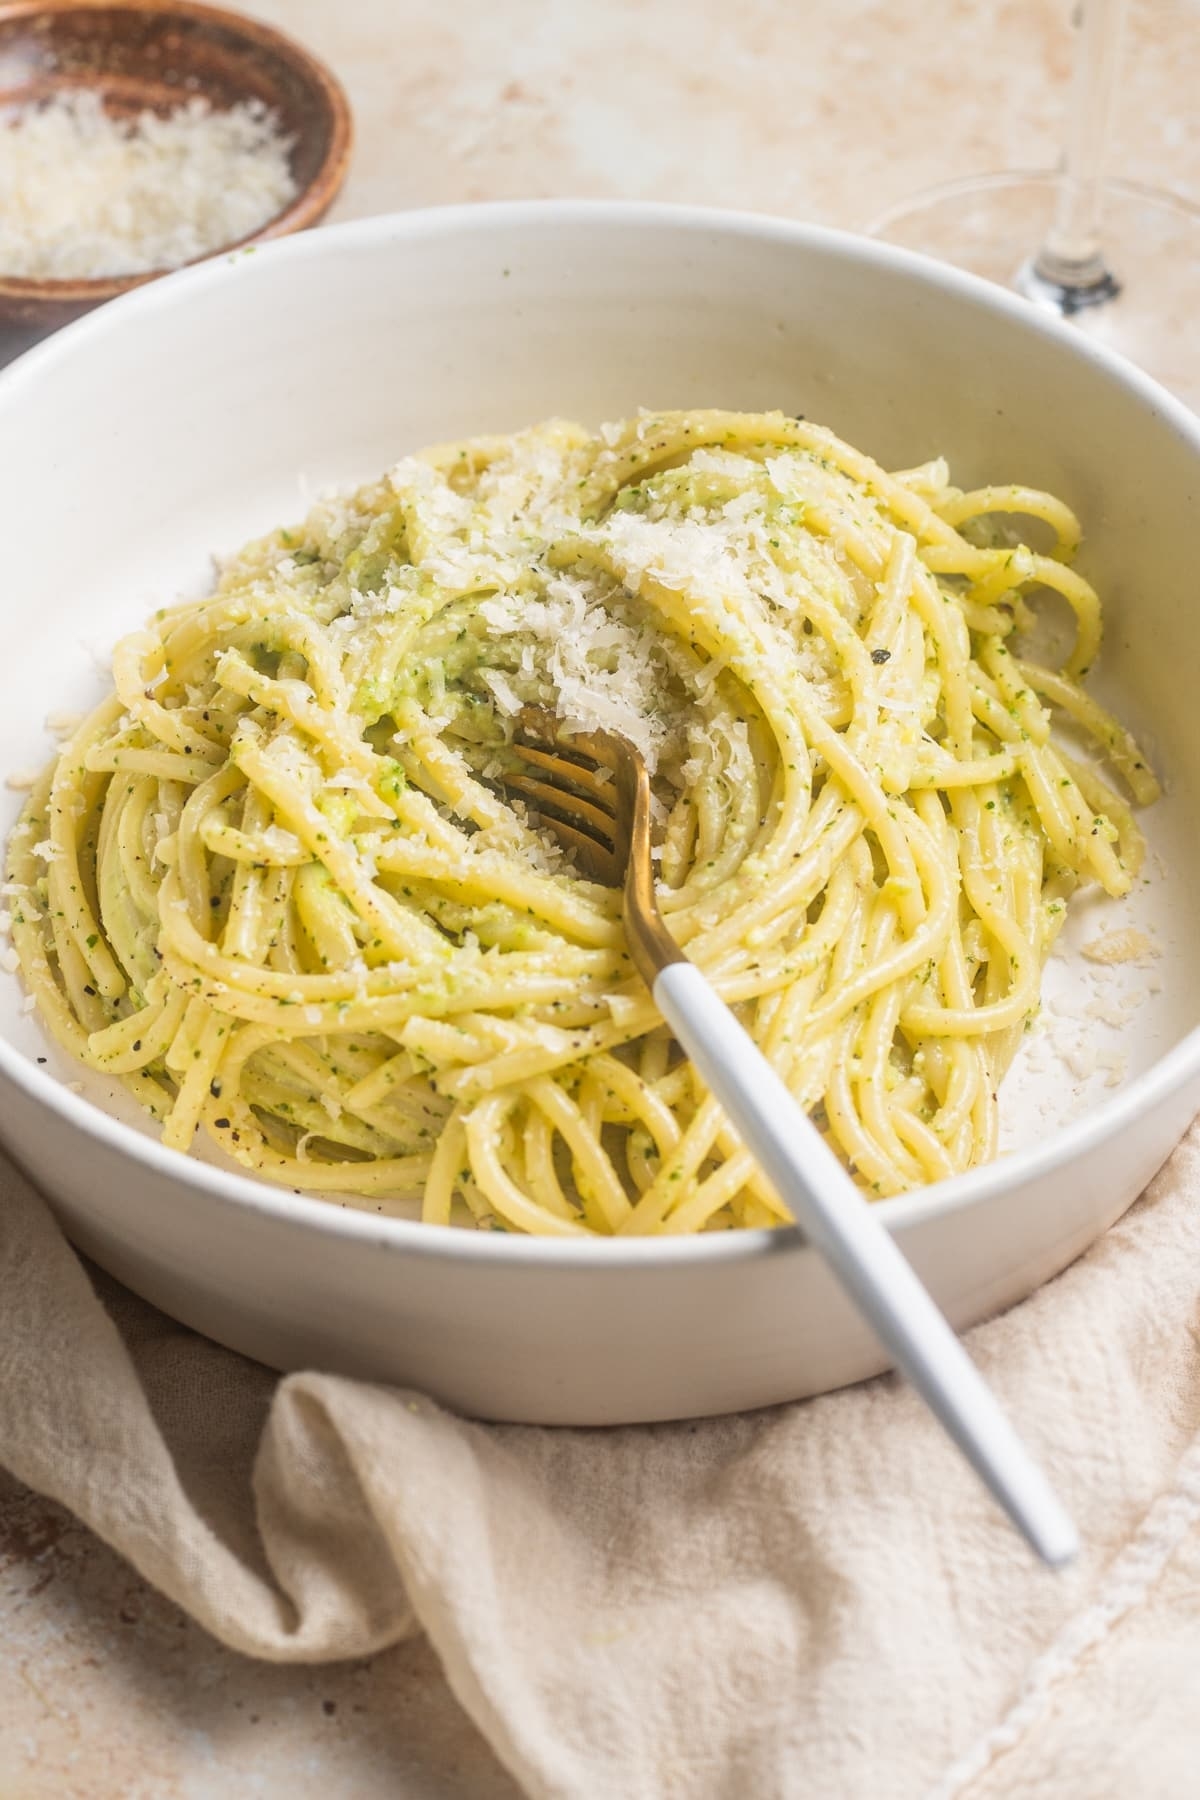 A bowl of spaghetti tossed in pesto sauce, garnished with grated cheese, with a fork